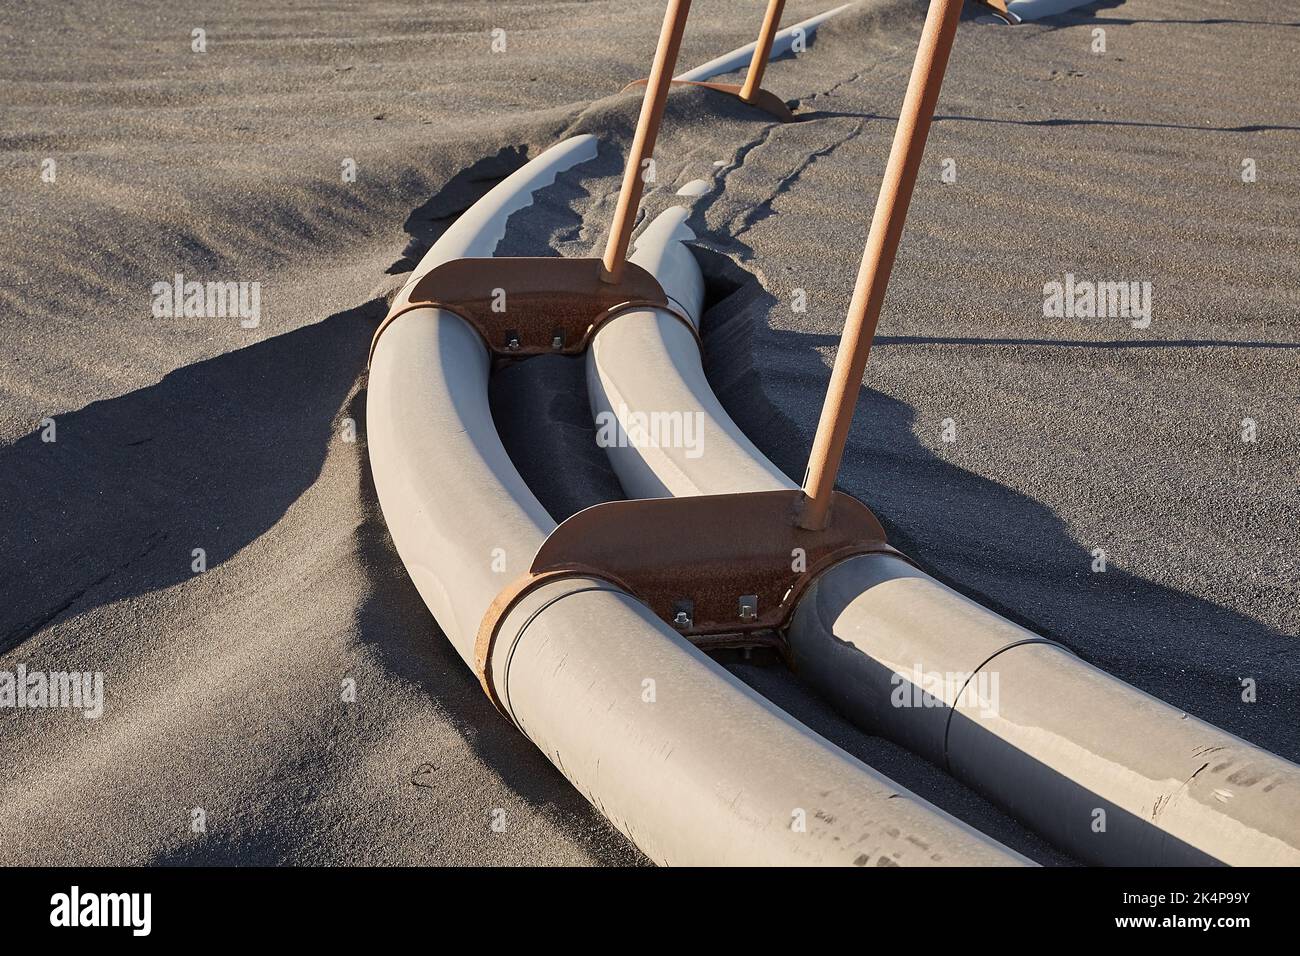 Pipes running on the ground Stock Photo